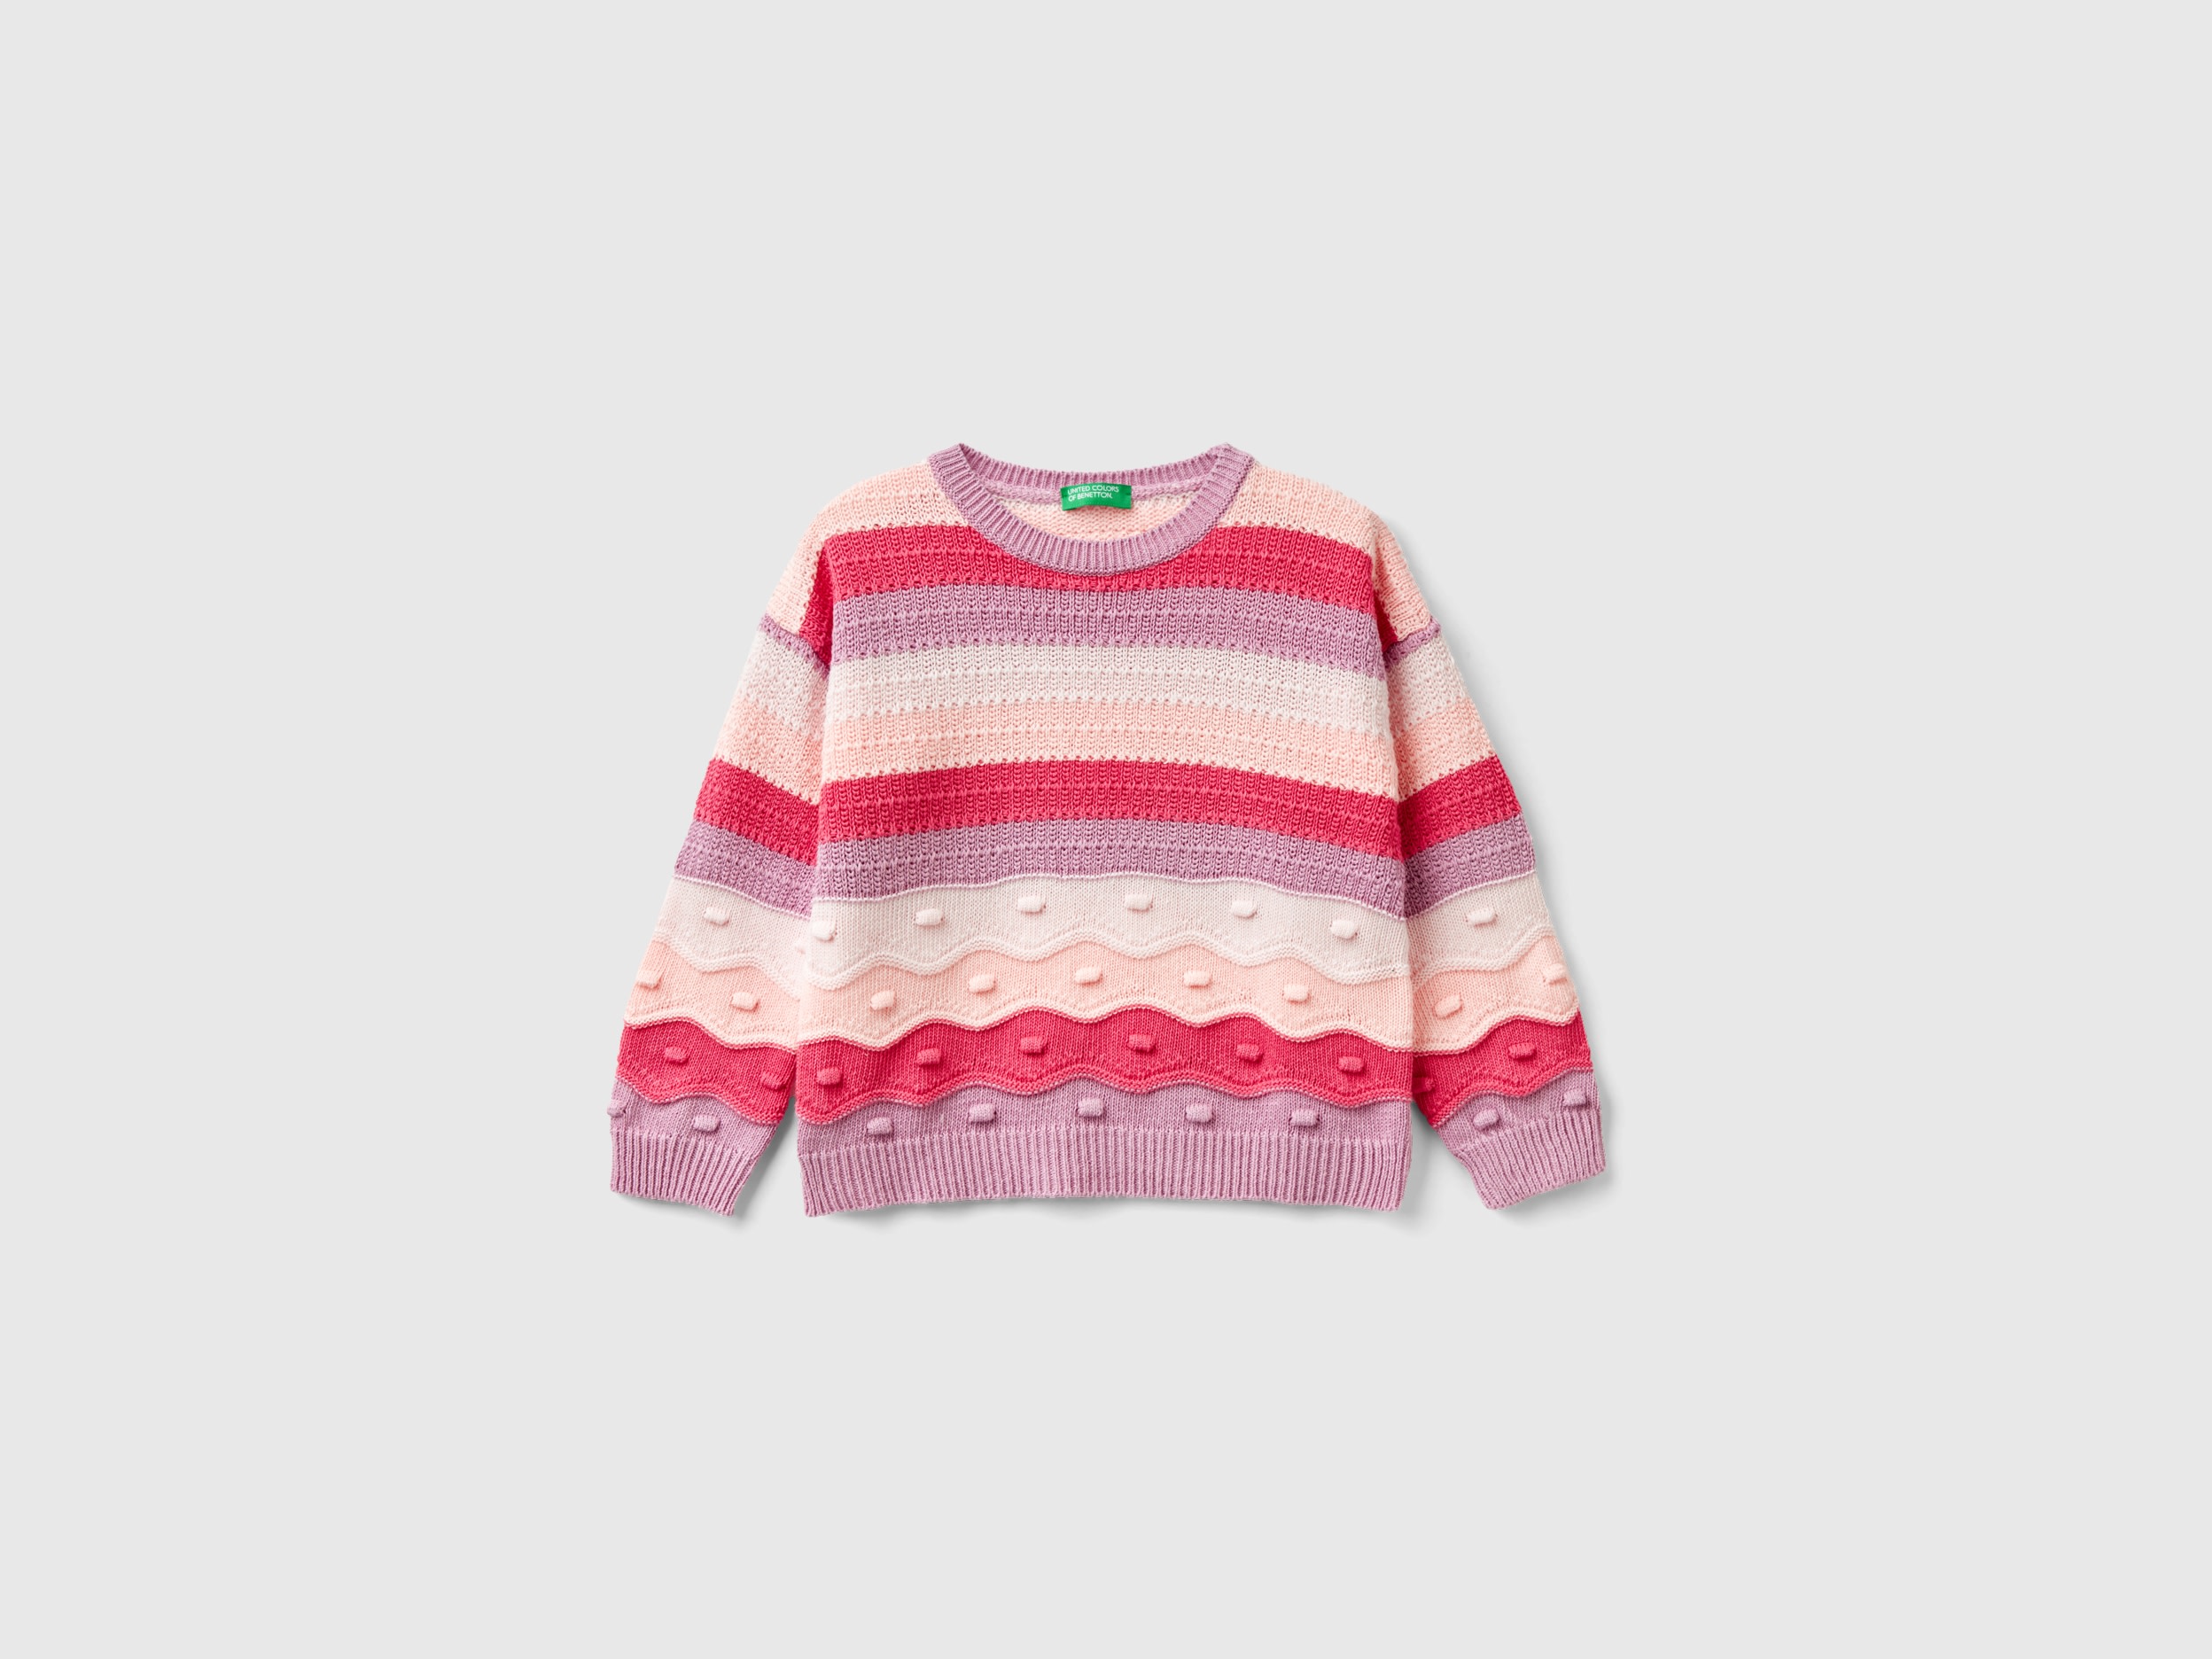 Image of Benetton, Striped Sweater In Recycled Cotton Blend, size 110, Multi-color, Kids